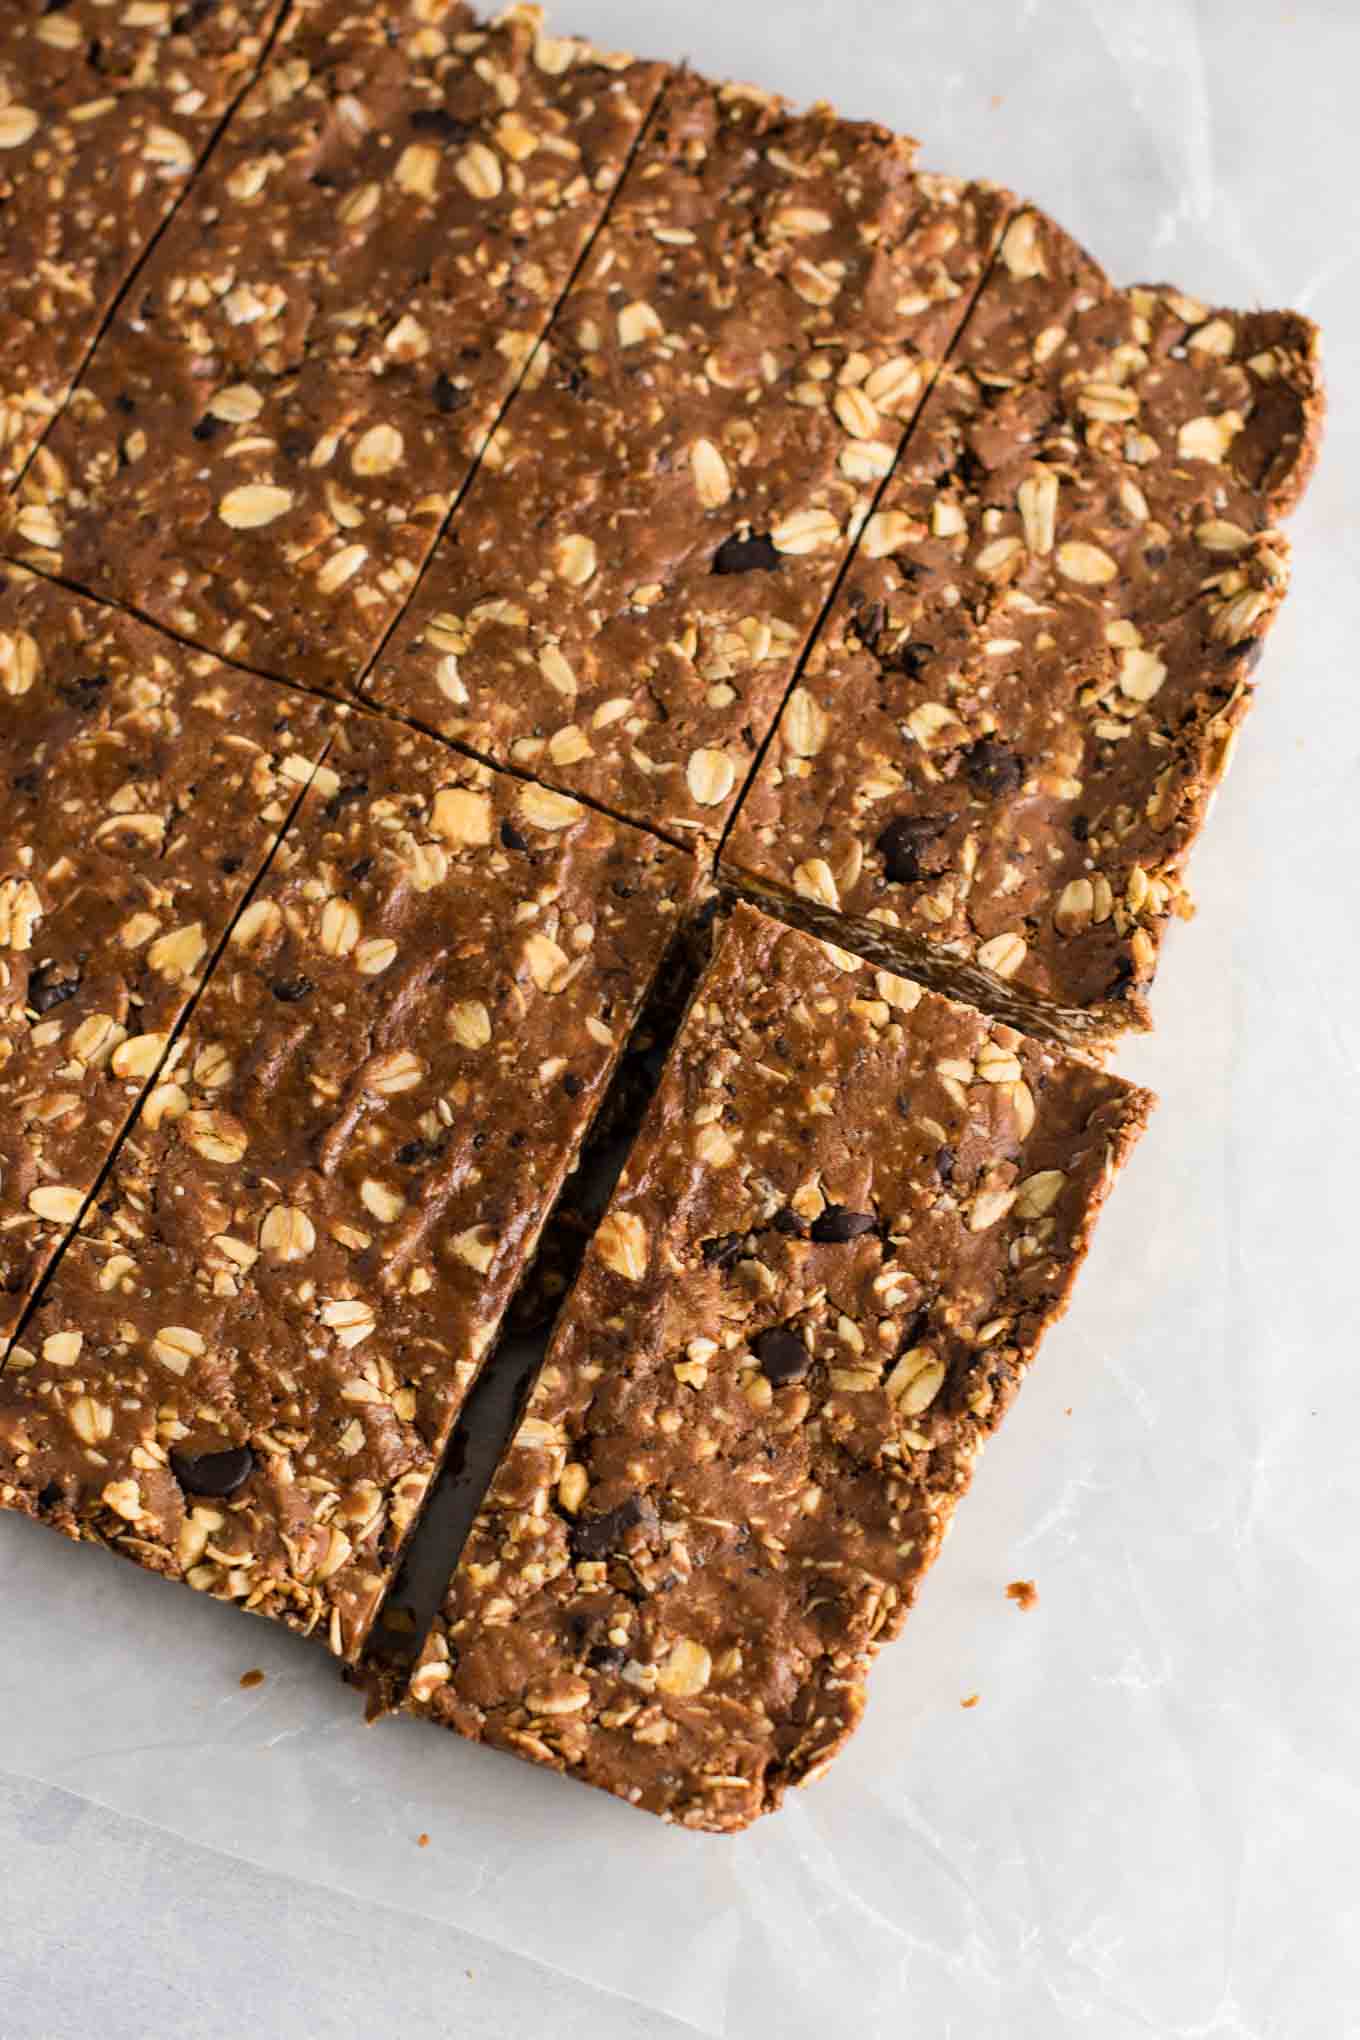 No bake chocolate cashew protein bars (vegan, gluten free.) An easy protein bar recipe perfect for meal prep. #nobake #proteinbars #vegan #glutenfree #mealprep 